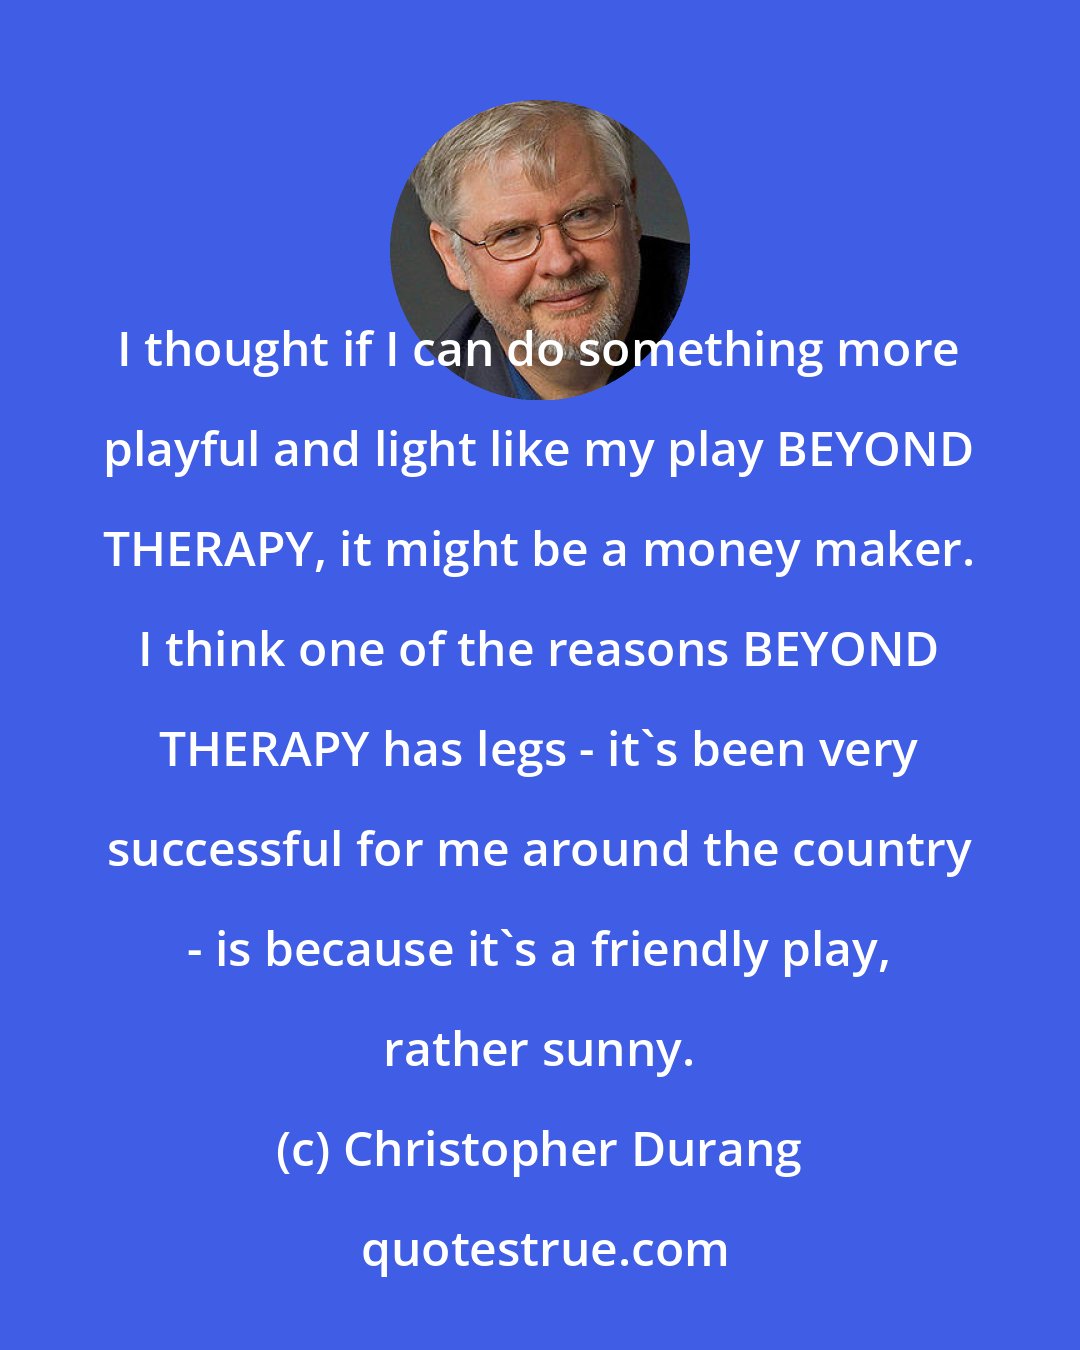 Christopher Durang: I thought if I can do something more playful and light like my play BEYOND THERAPY, it might be a money maker. I think one of the reasons BEYOND THERAPY has legs - it's been very successful for me around the country - is because it's a friendly play, rather sunny.